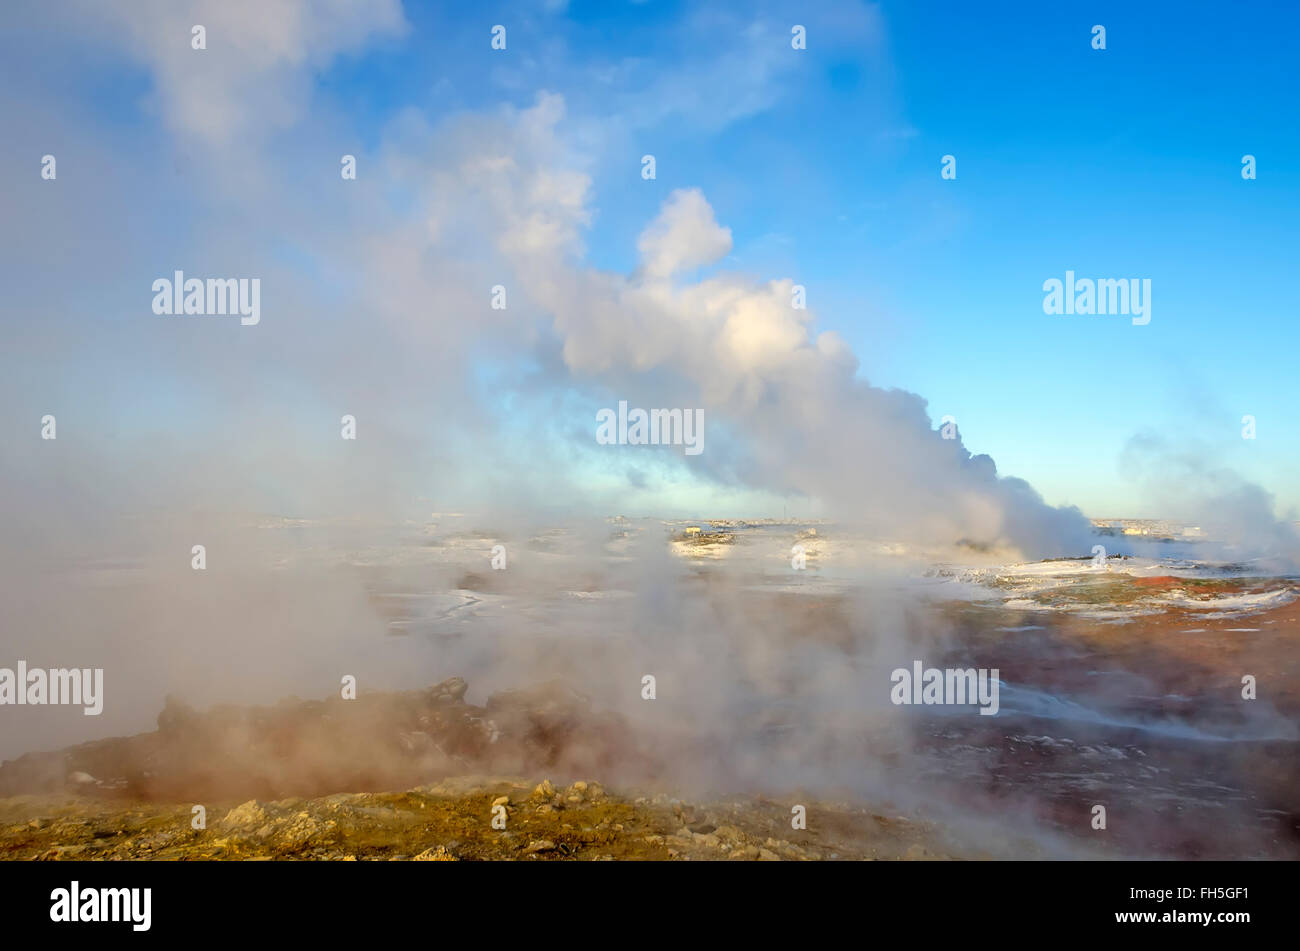 Gunnuhver geothermal area winter steam vents from boiling hot springs  Reykjanes Peninsula Iceland Stock Photo